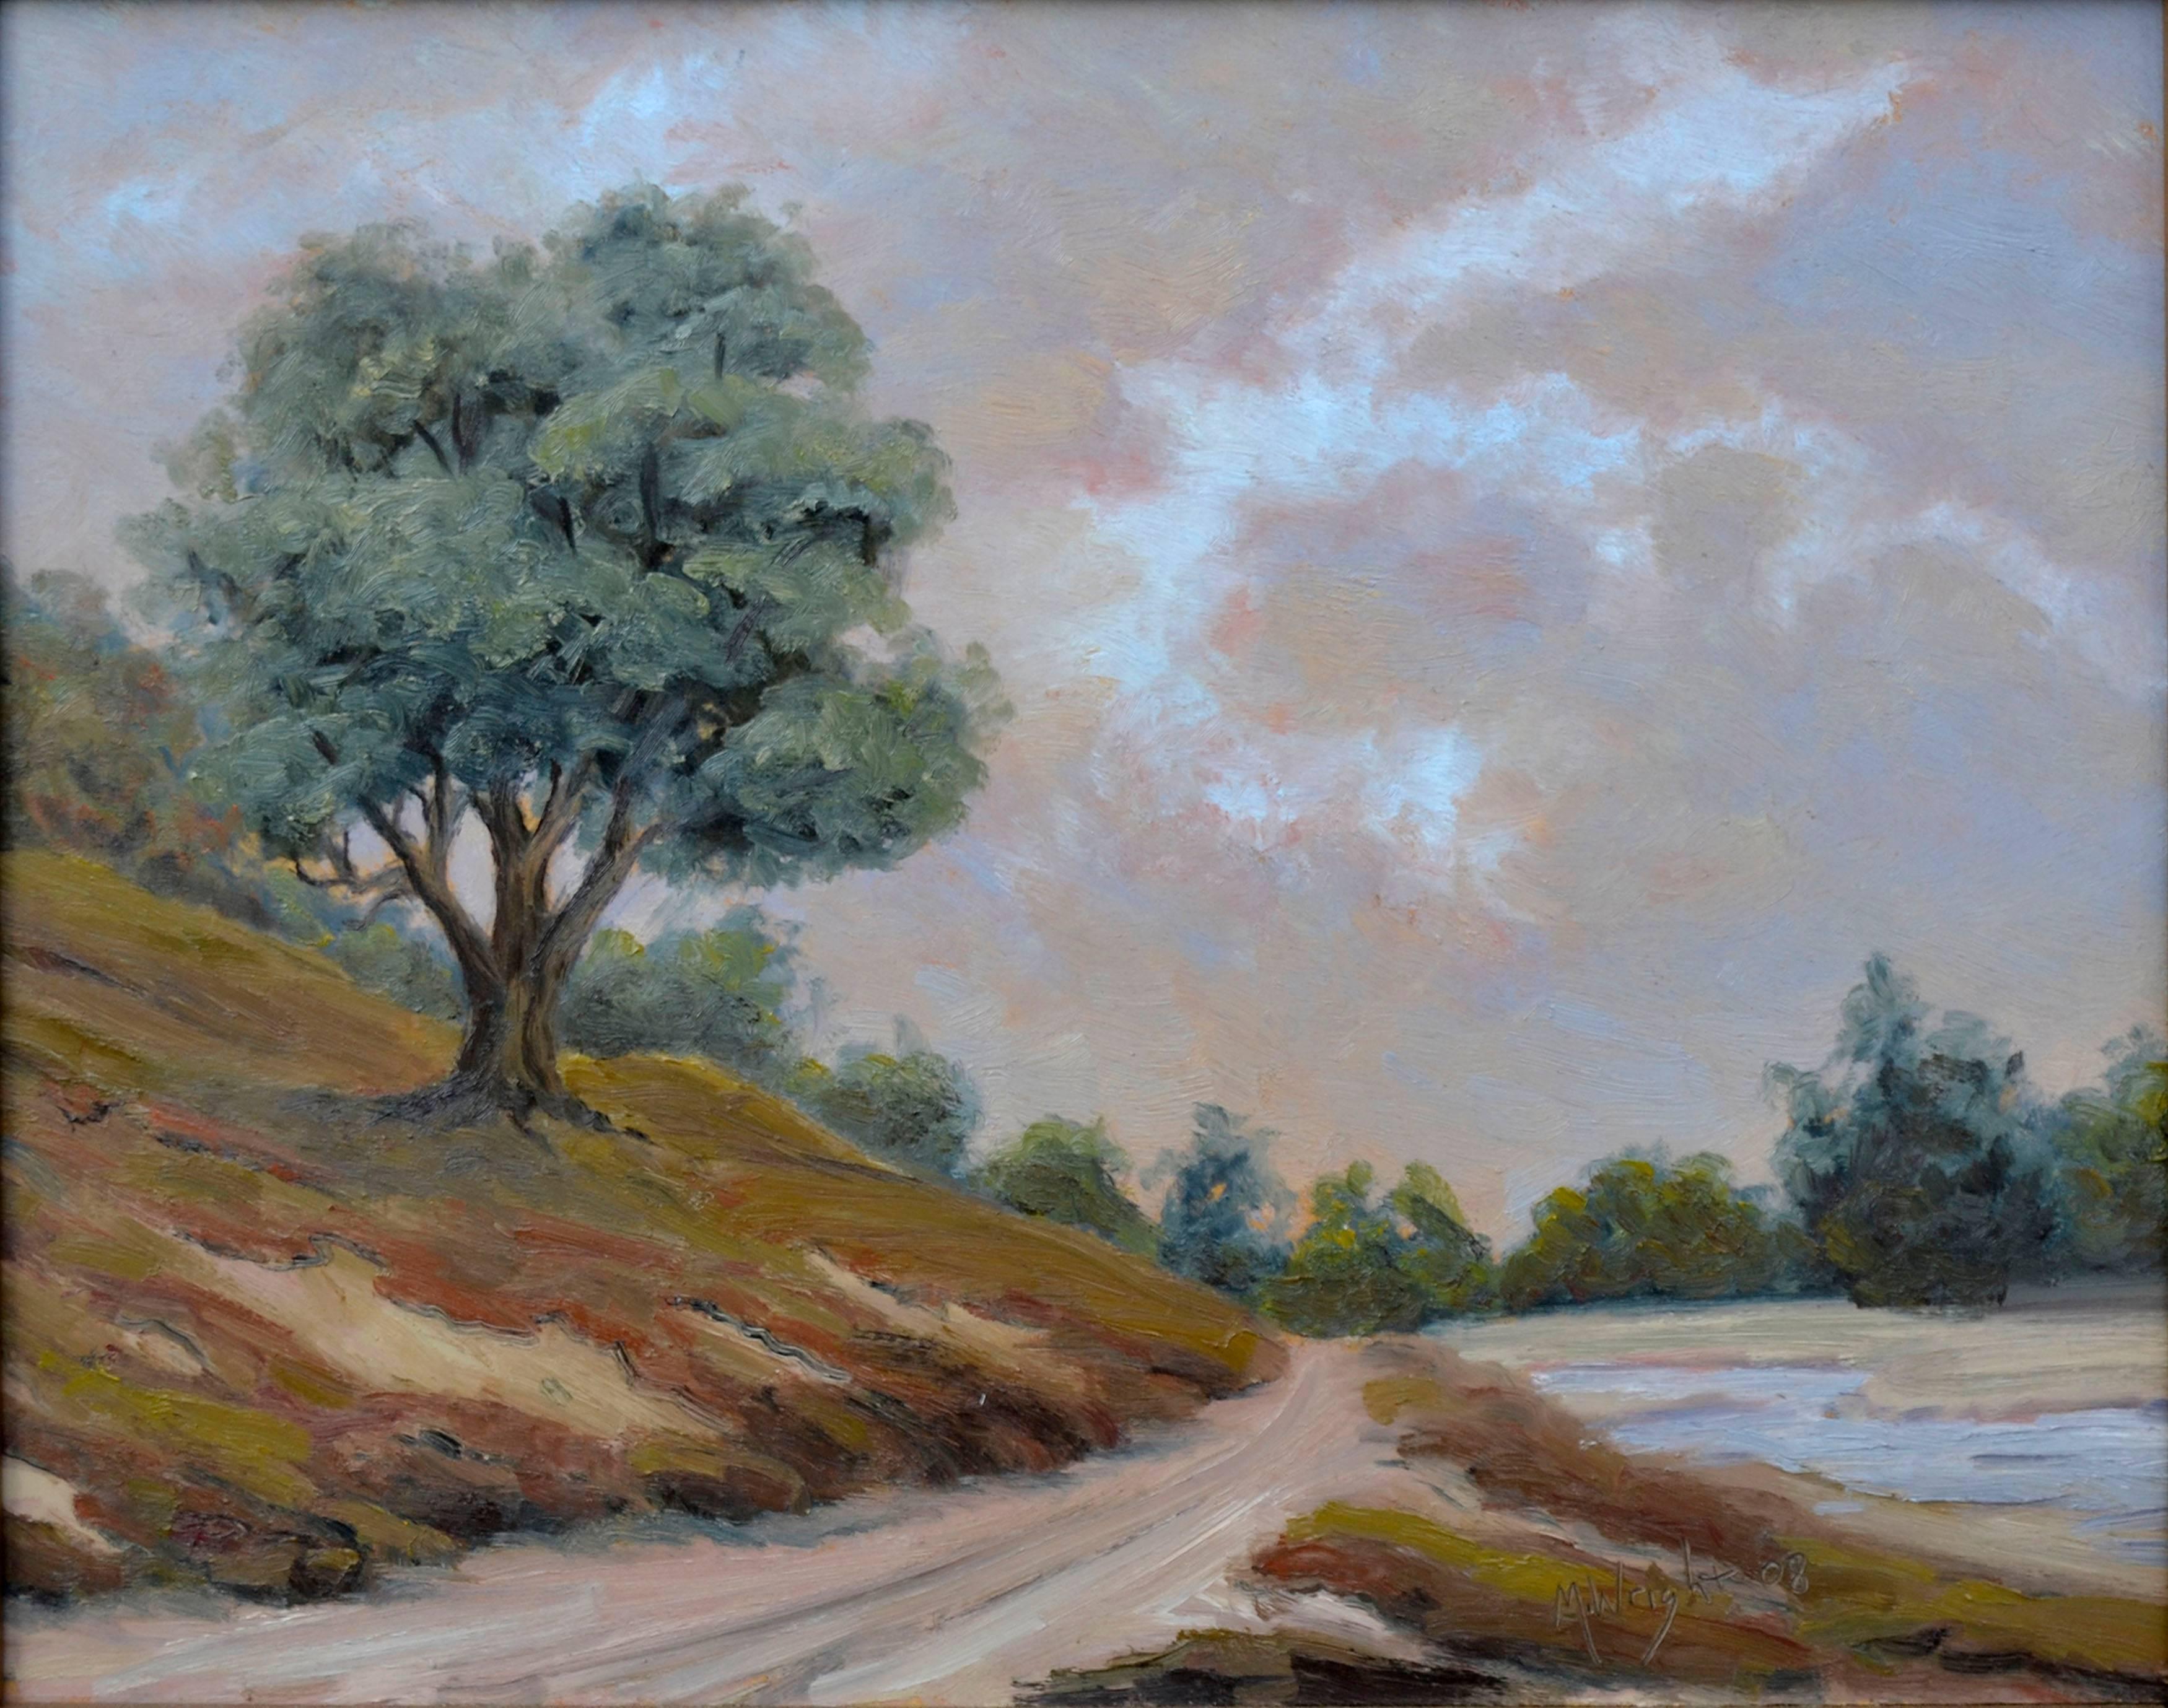 Old Slough Road - Elkhorn Slough Landscape  - Painting by Mike Wright